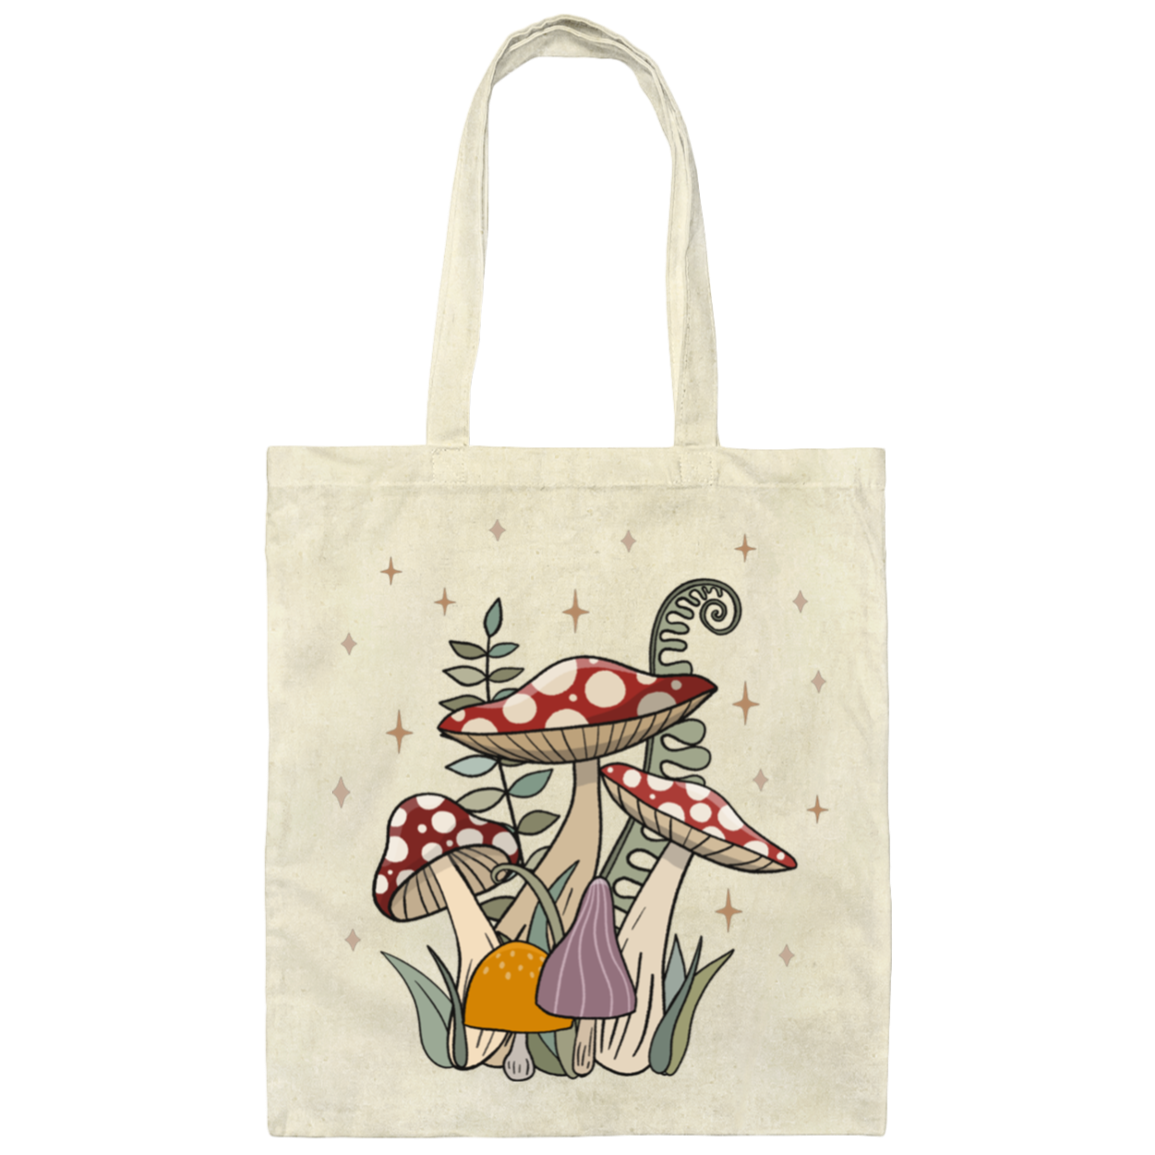 Totebag, Tote Bag, Cottagecore, Cottagecore Tote Bag, Tote Bag Cottagecore,  Canvas Tote Bag, Tote Bag Aesthetic, Tote Bag Canvas, Ecobag 